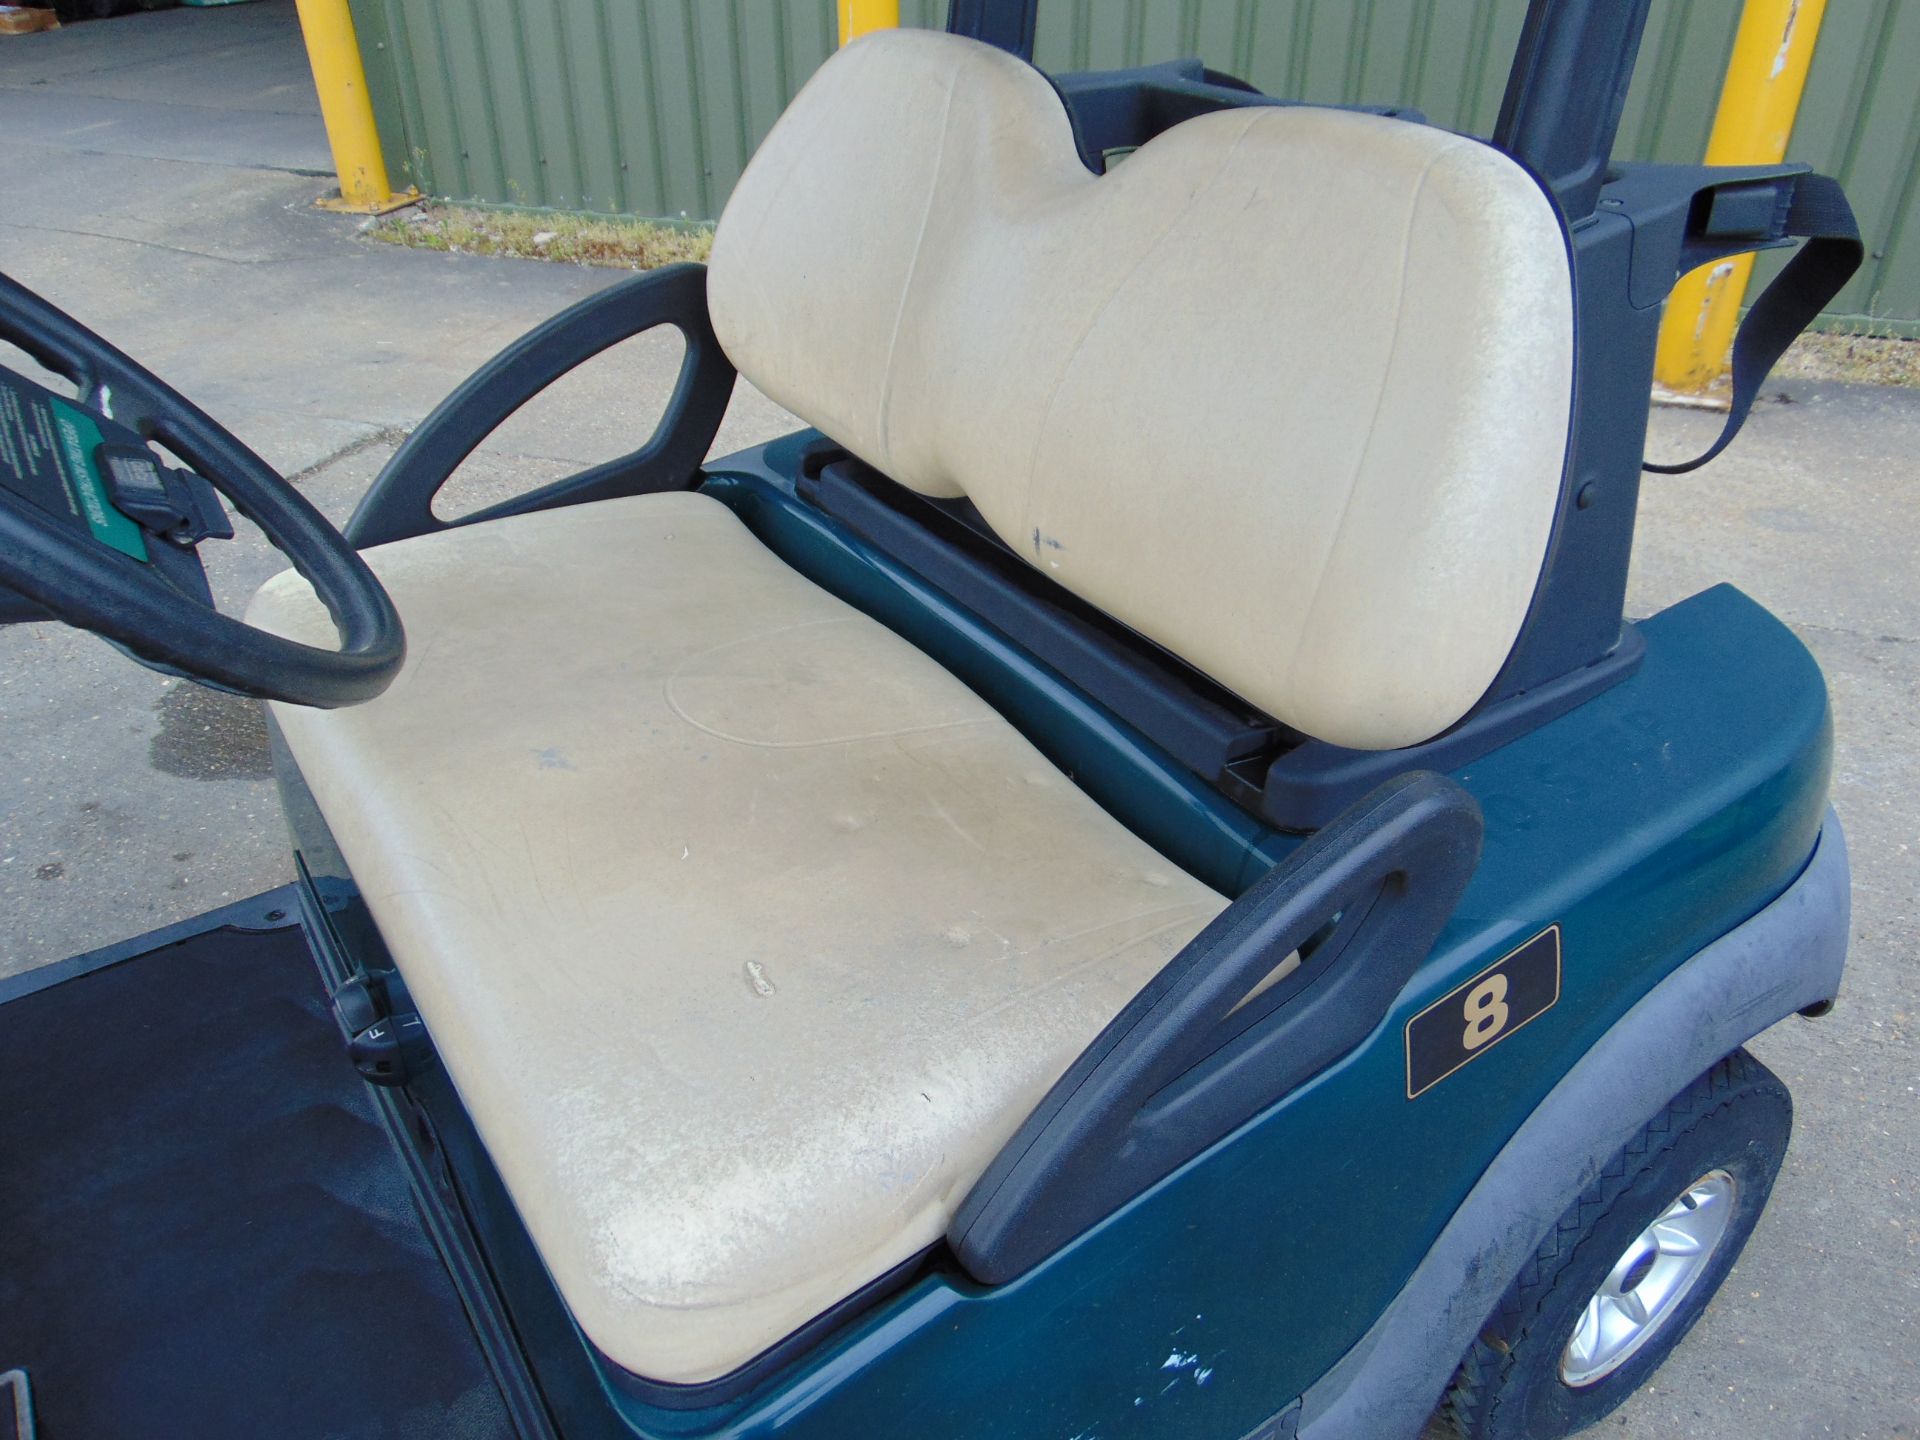 Club Car 2 Seat Electric Golf Buggy C/W Battery Charger - Image 10 of 13